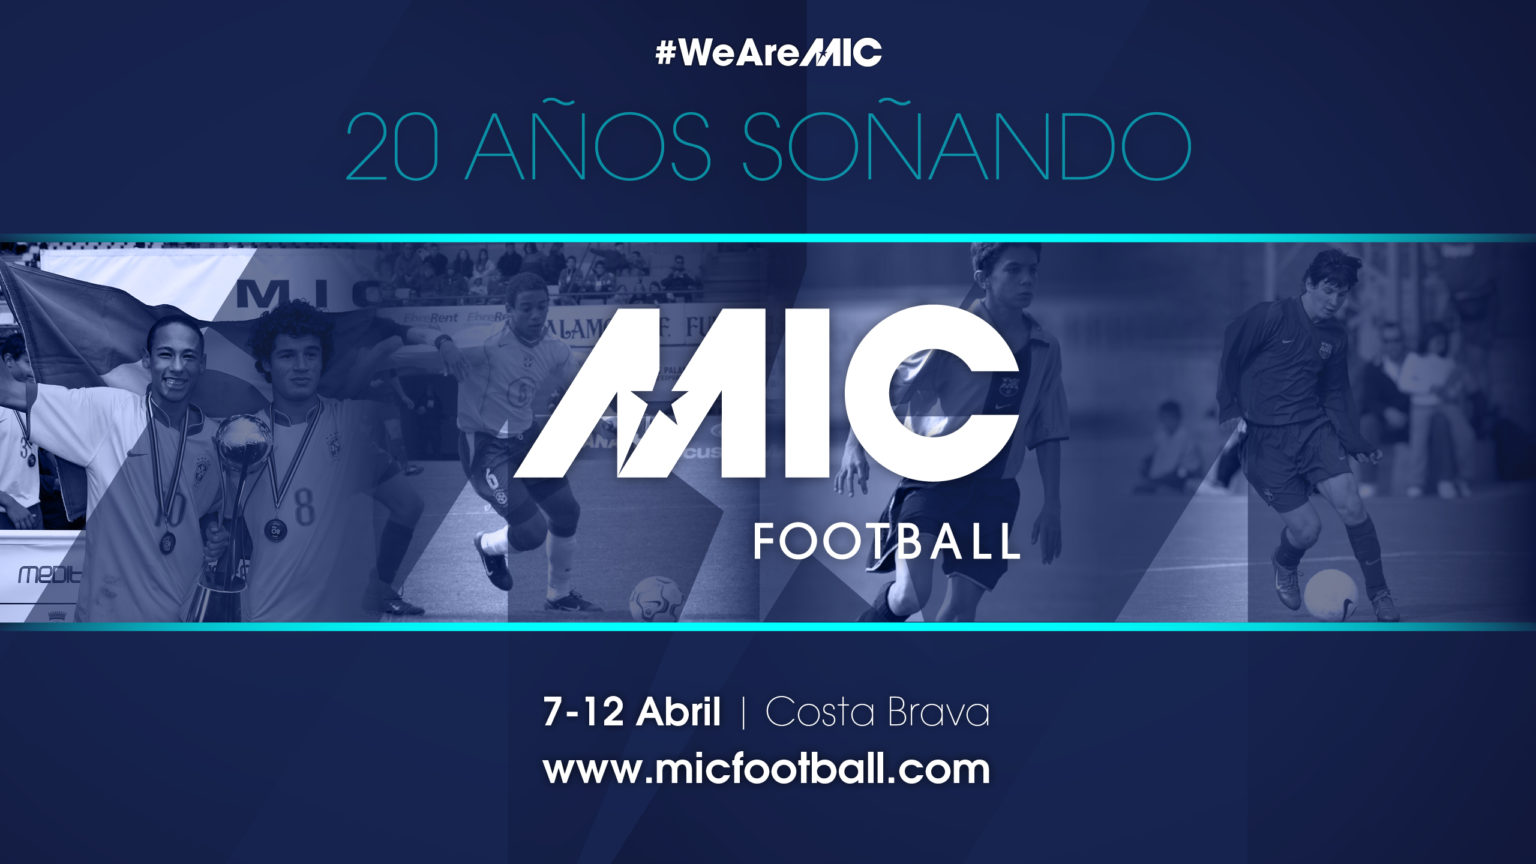 THIS IS MIC MICFOOTBALL